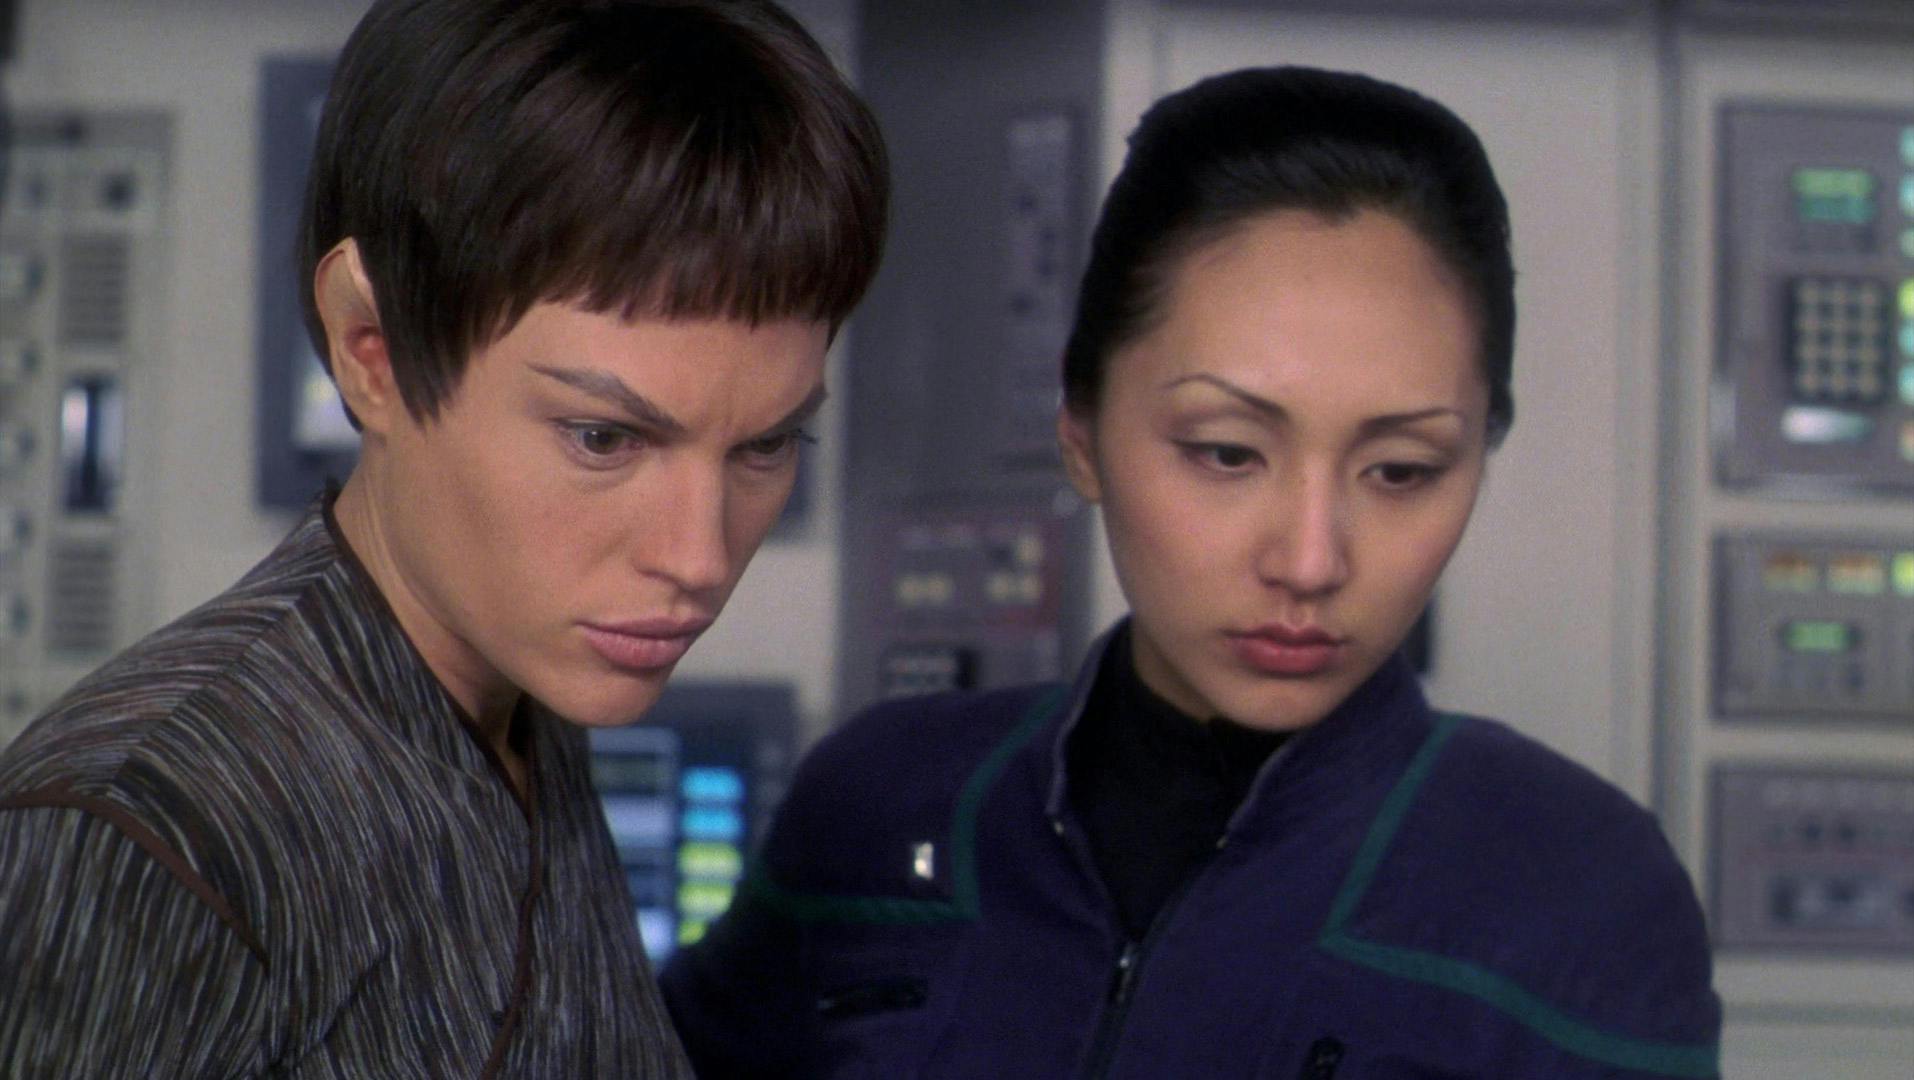 T'Pol and Hoshi Sato work side-by-side accessing the readings in 'Vox Sola'